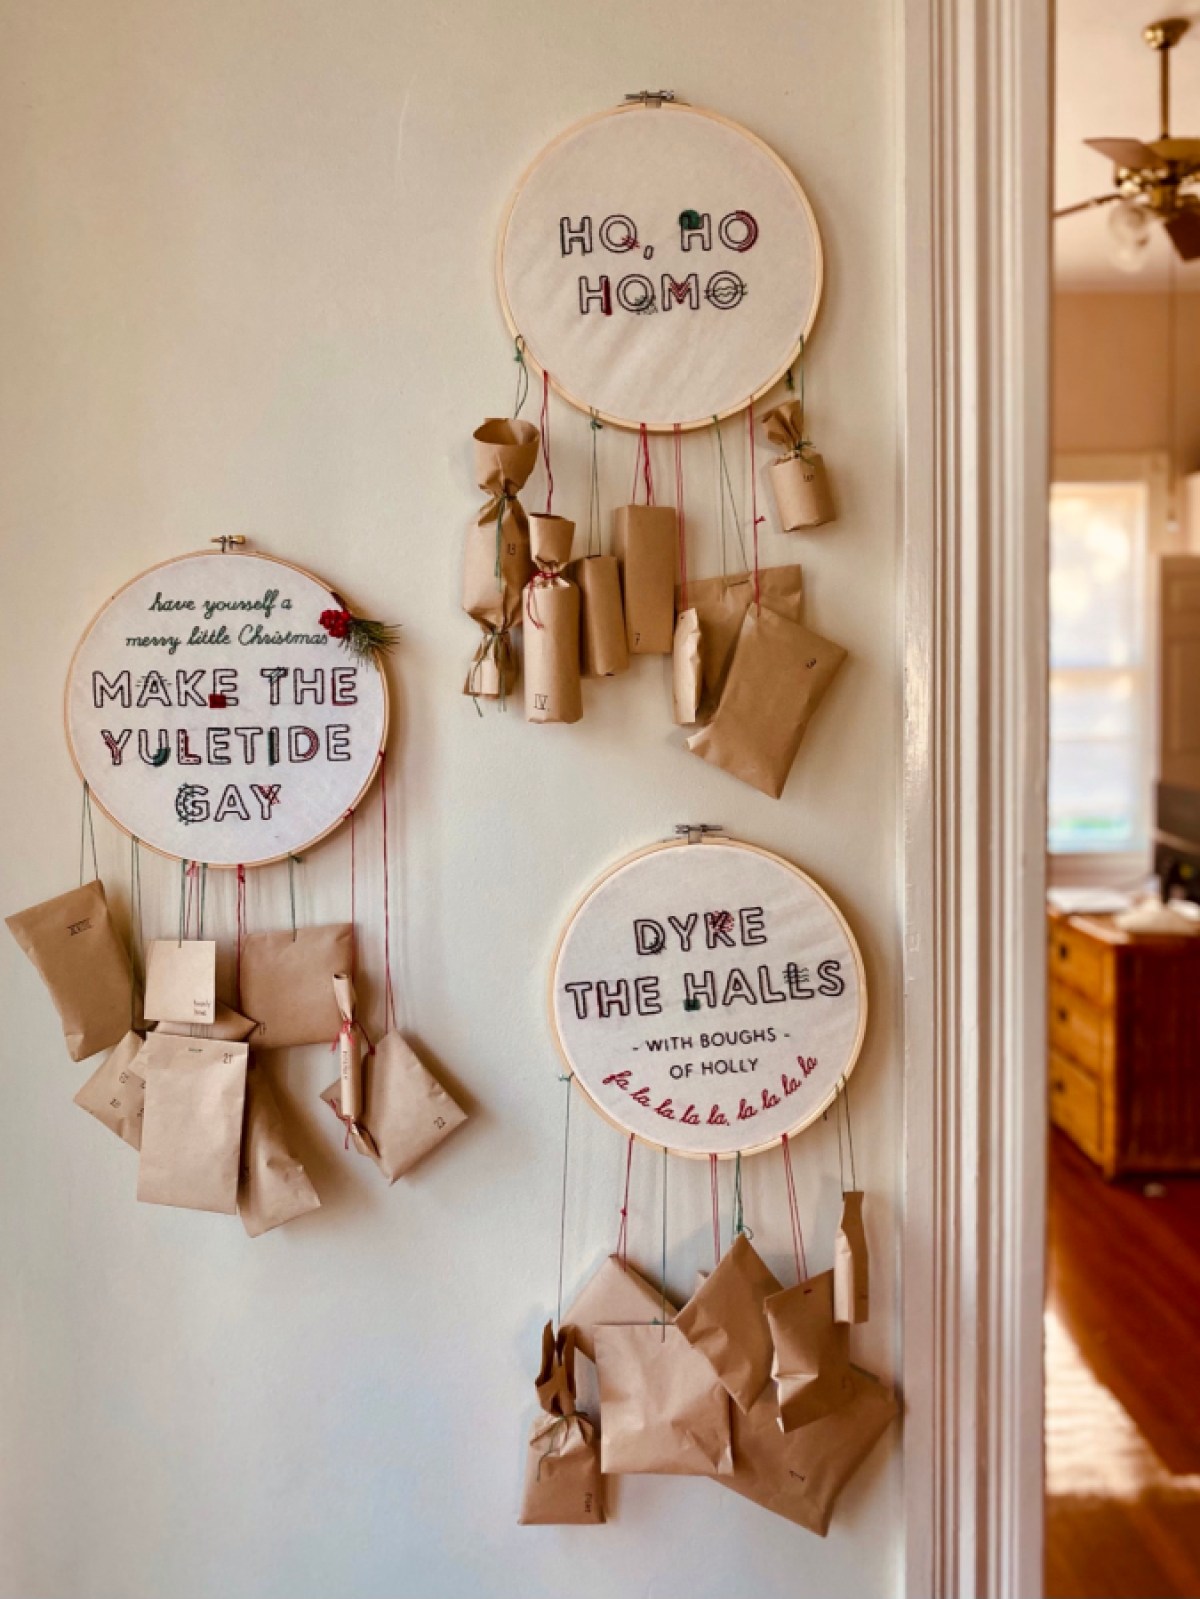 Three framed cross stitch pieces hang on a white wall, reading "Ho Ho Homo," "Have yourself a merry little Christmas, make the yuletide gay" and "Dyke the halls with boughs of holly." Each cross stitch has small brown paper wrapped parcels tied to the bottom